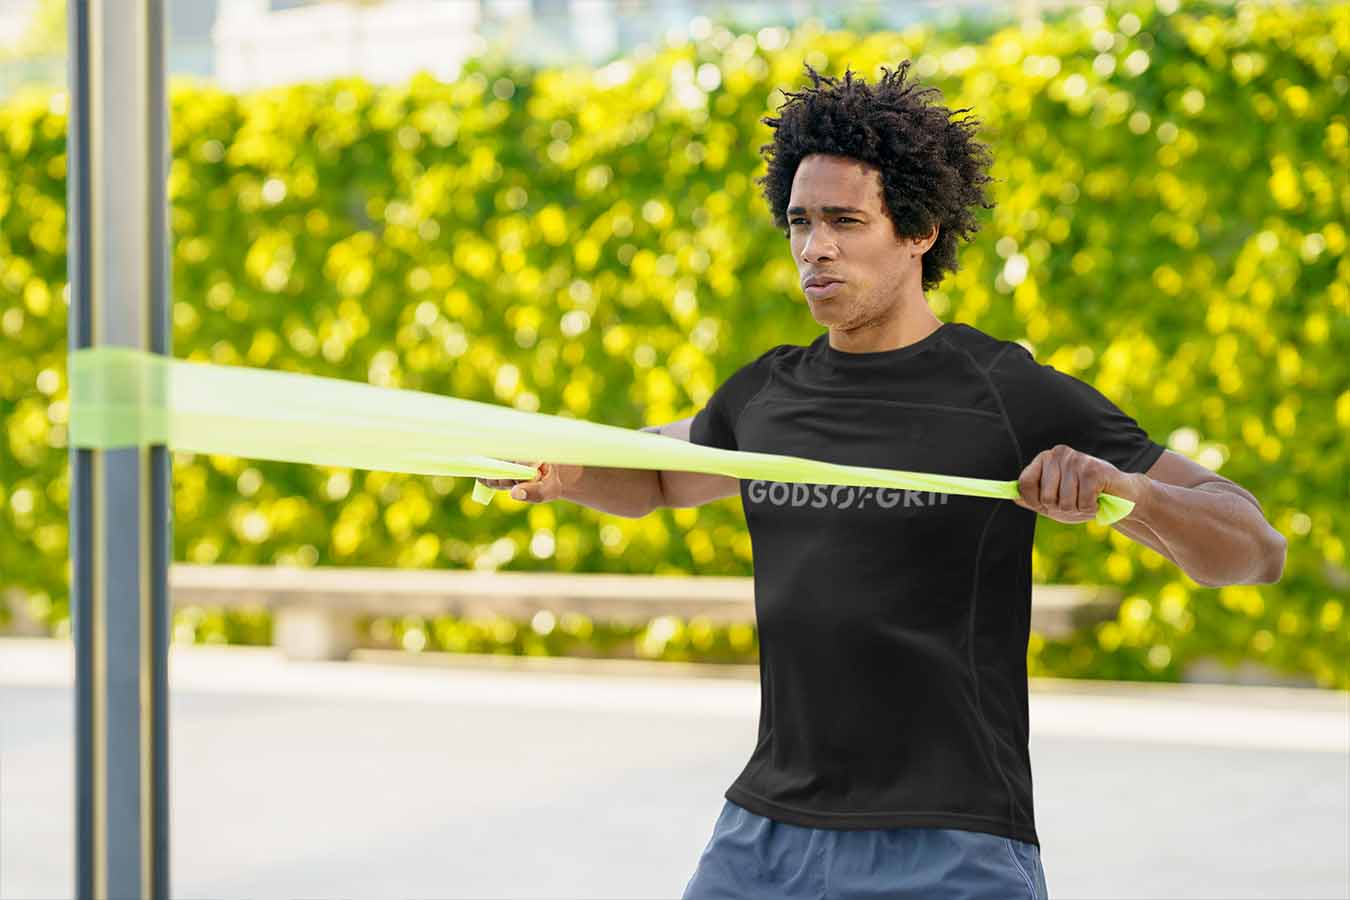 The 8 Best Resistance Band Arm Exercises + Resistance Band Arm Workouts For  Biceps & Triceps